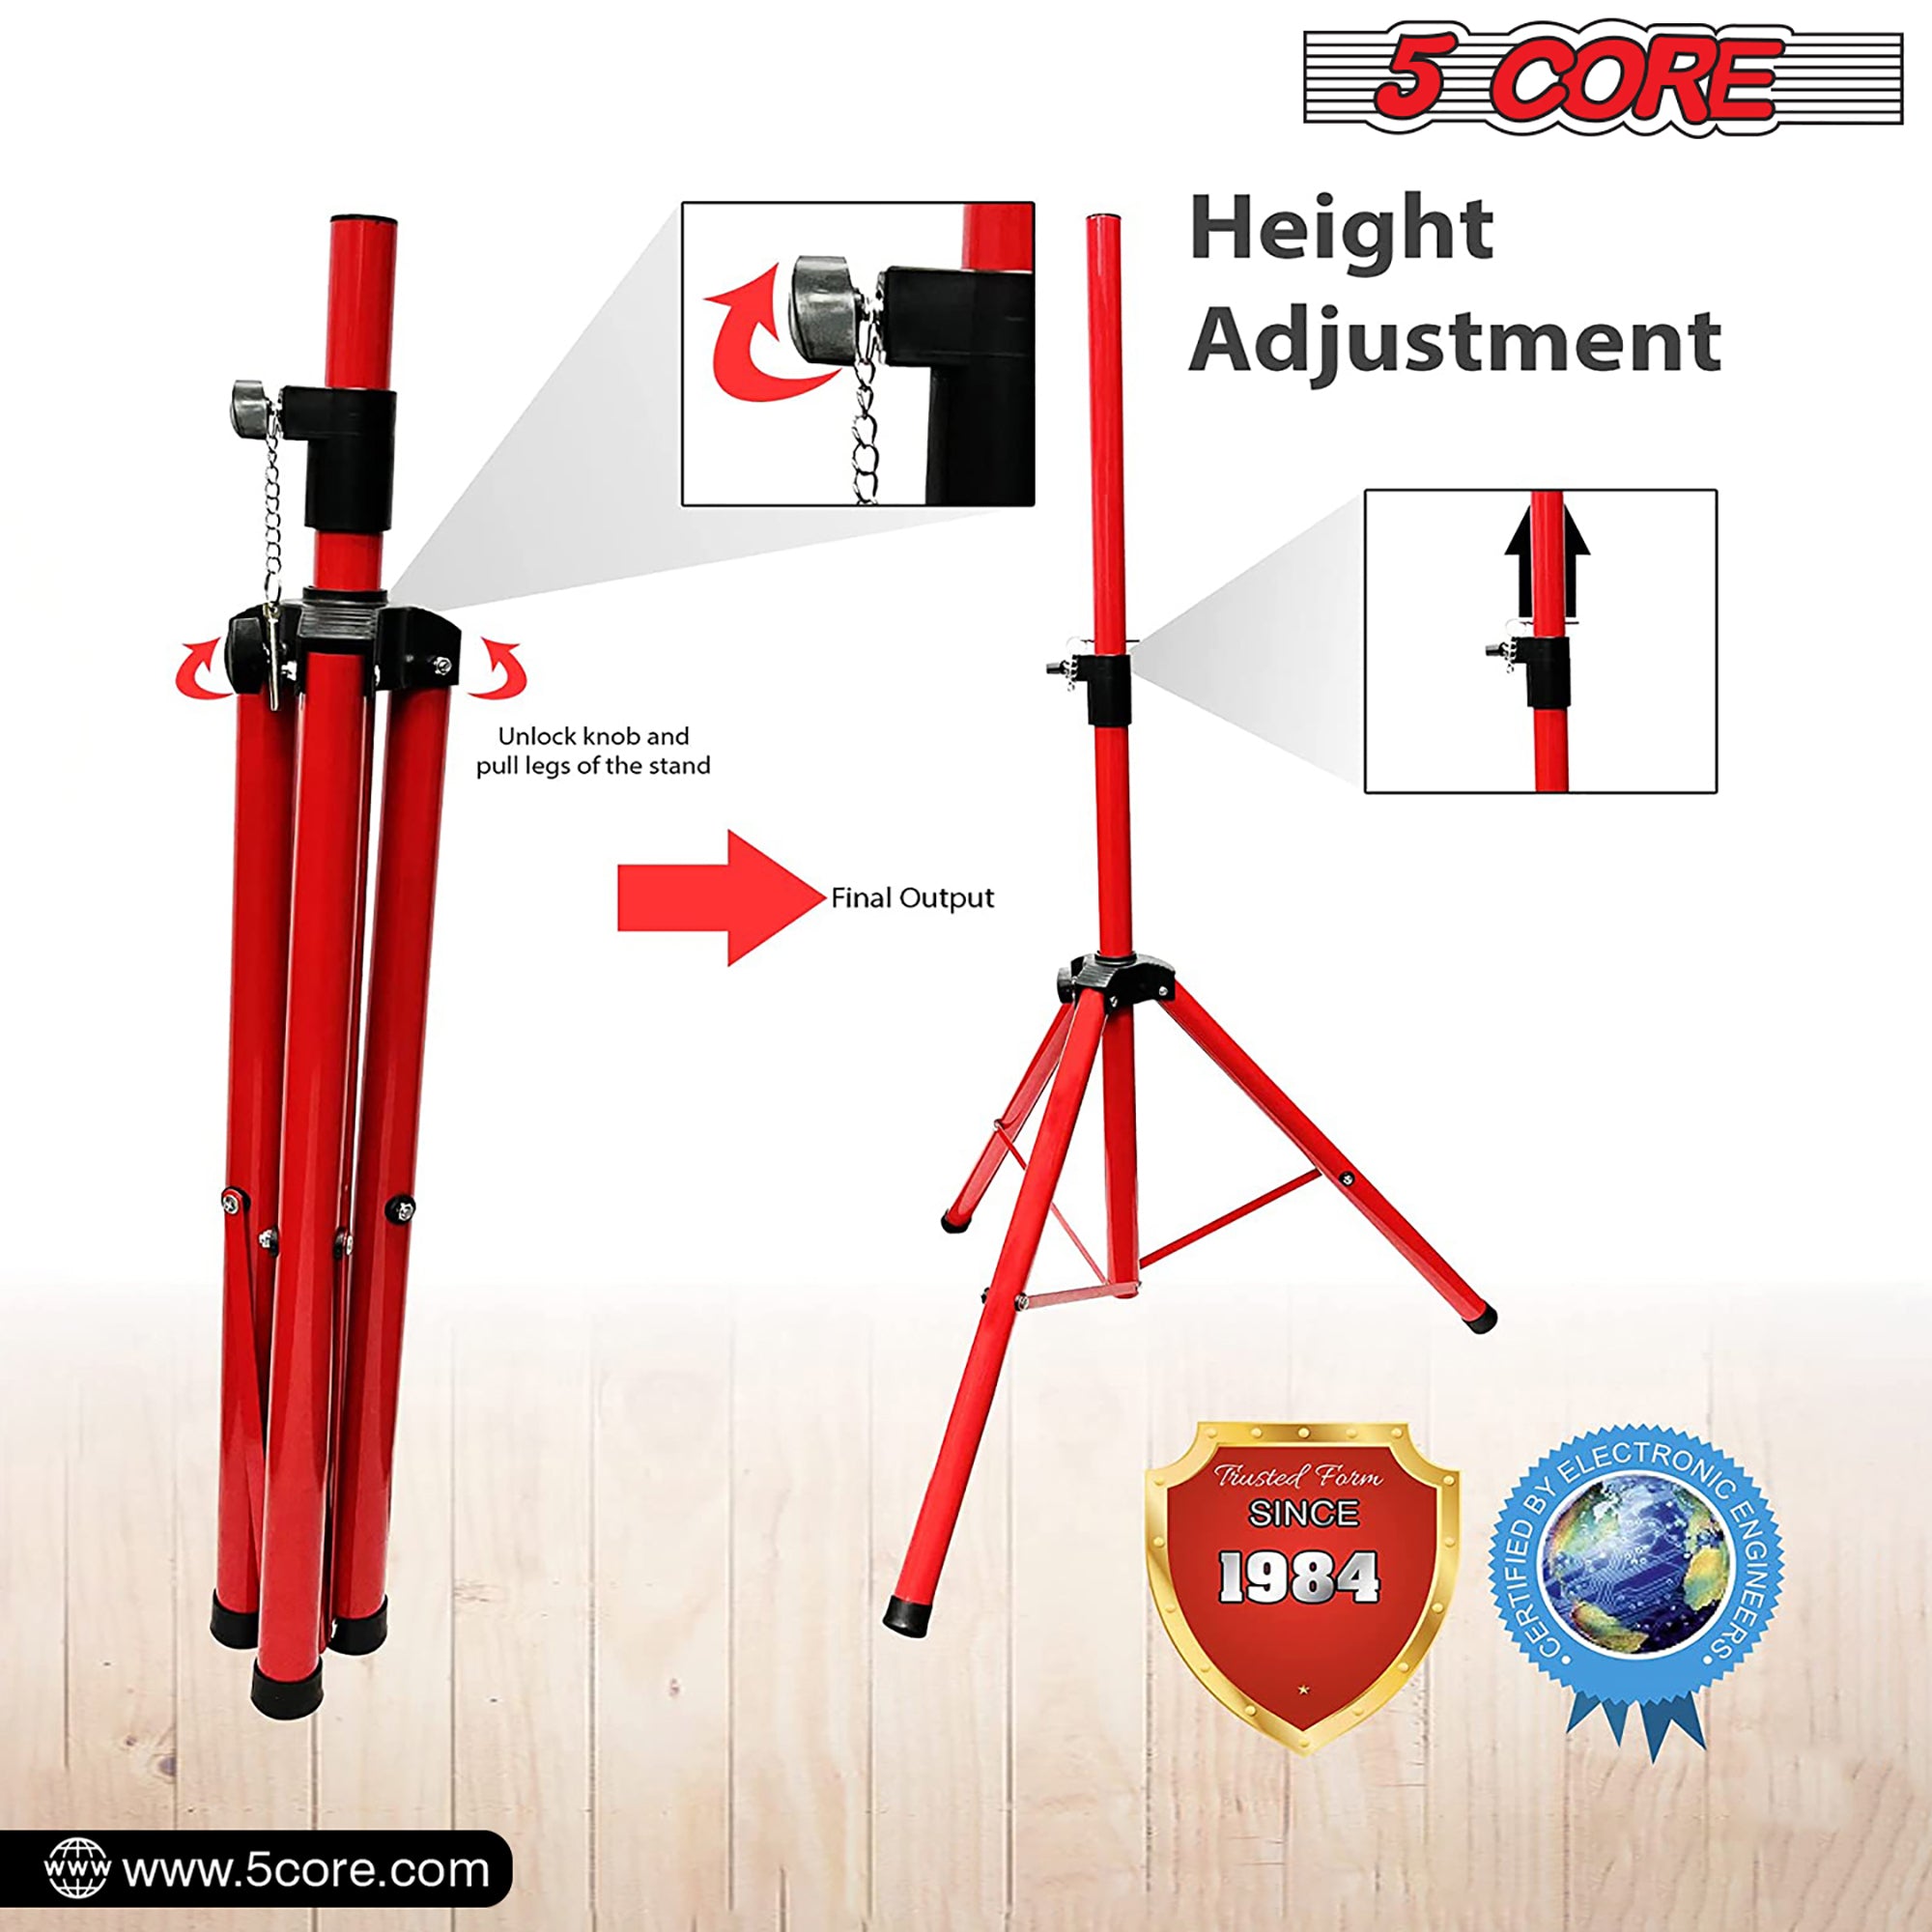 5 Core PA Speaker Stands Short Height Adjustable Professional DJ Tripod with Mounting Bracket, Extend from 40 to 72 inches, Red SS ECO 1PK RED WoB